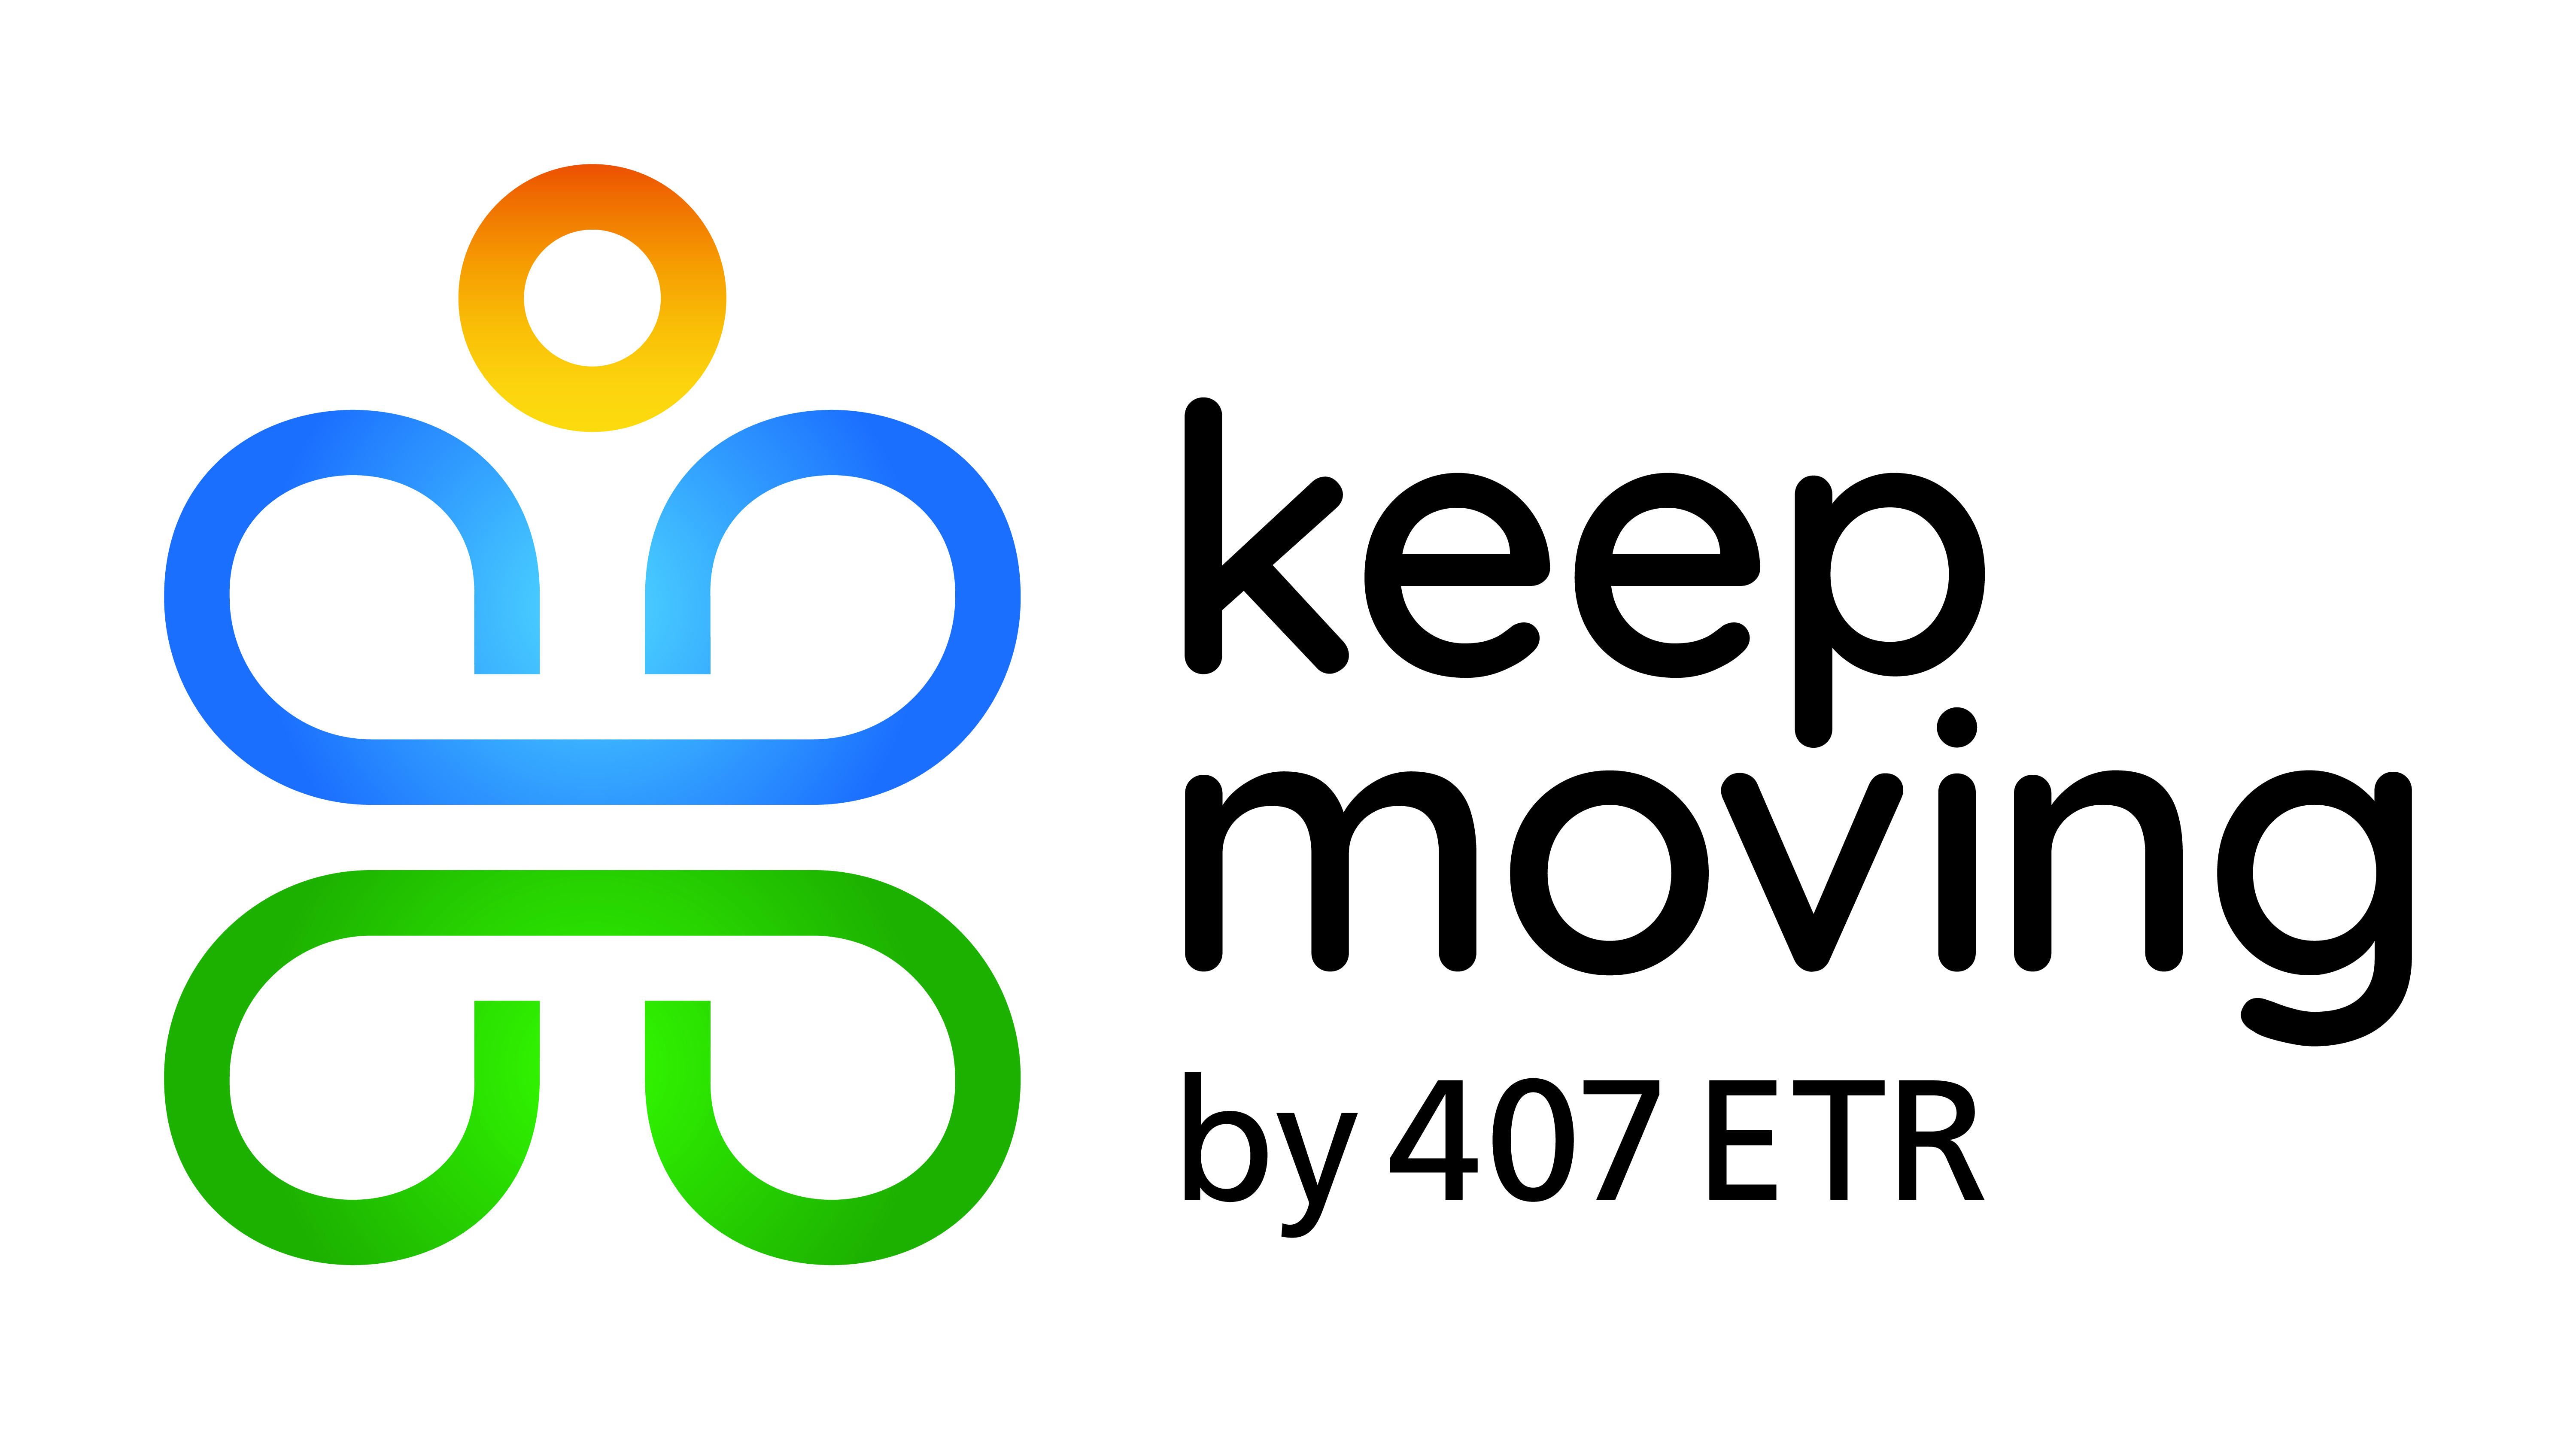 Keep Moving by 407ETR